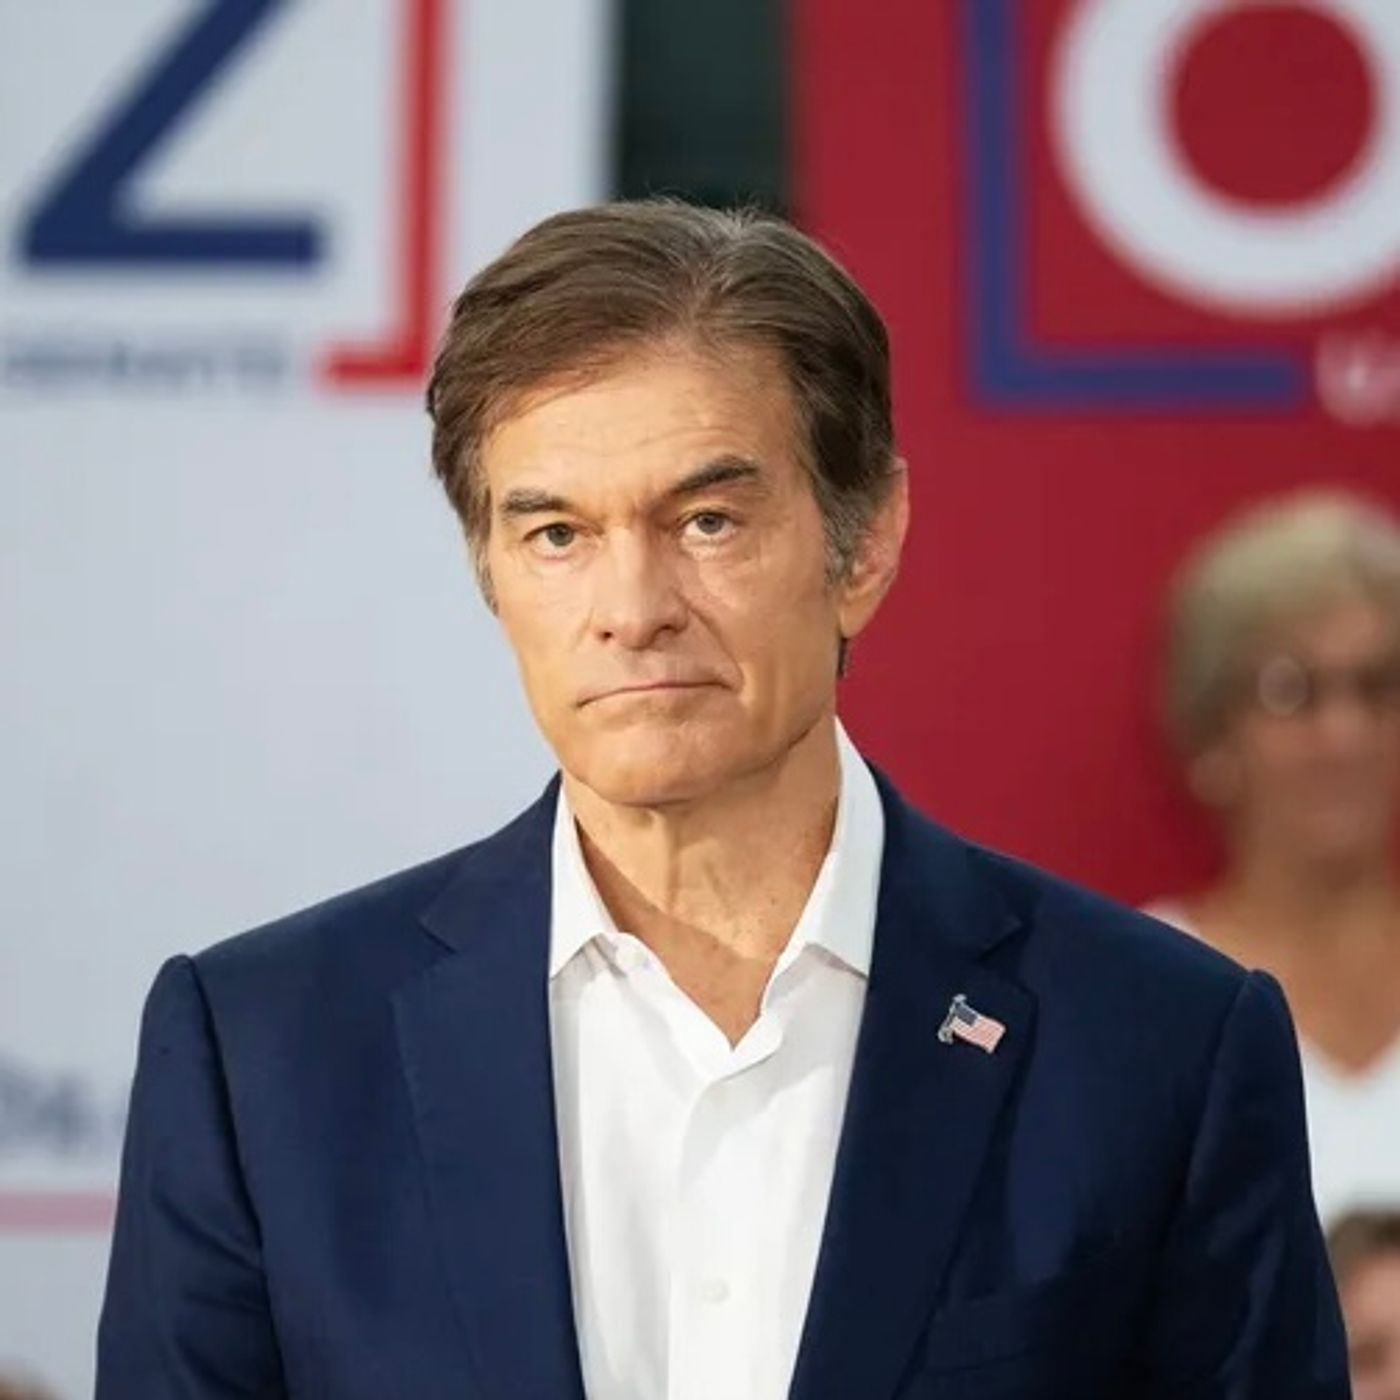 Dr. Oz has dating advice Image